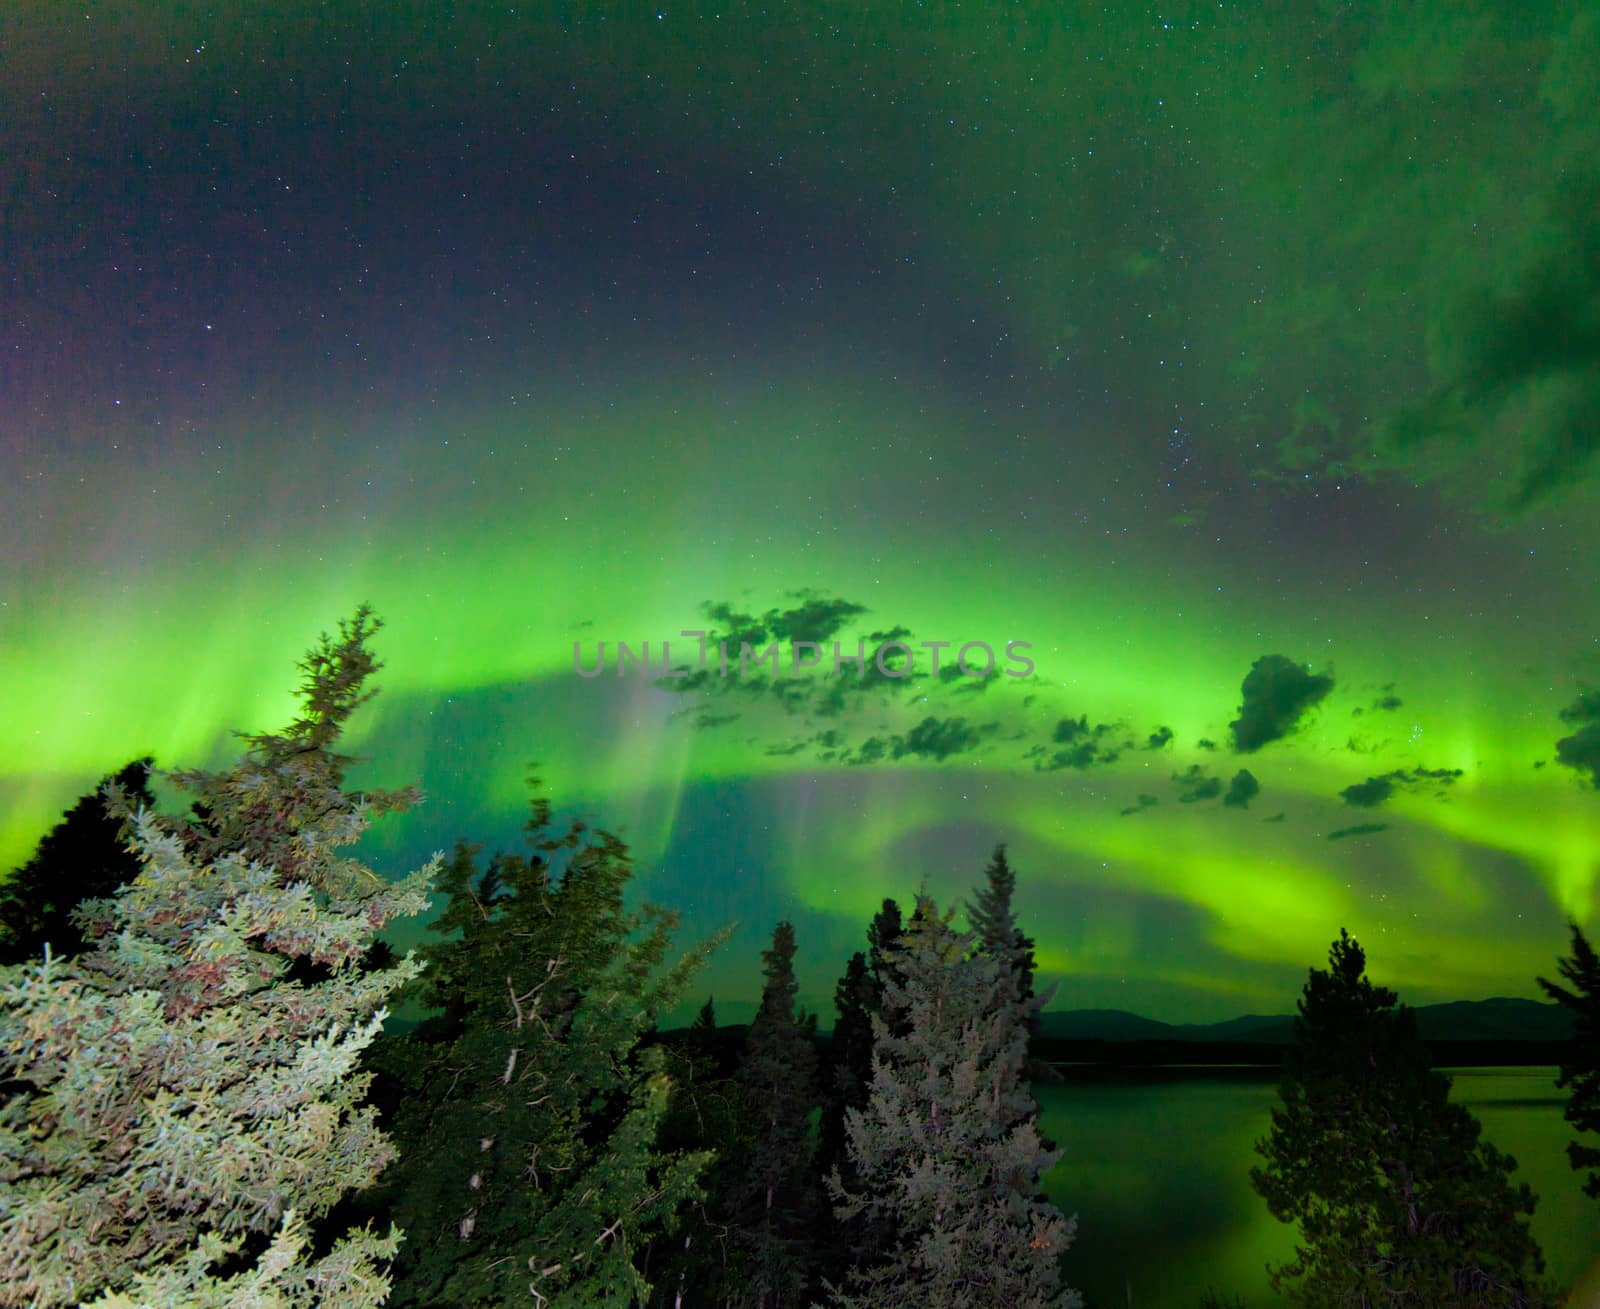 Intense green Aurora borealis over boreal forest by PiLens